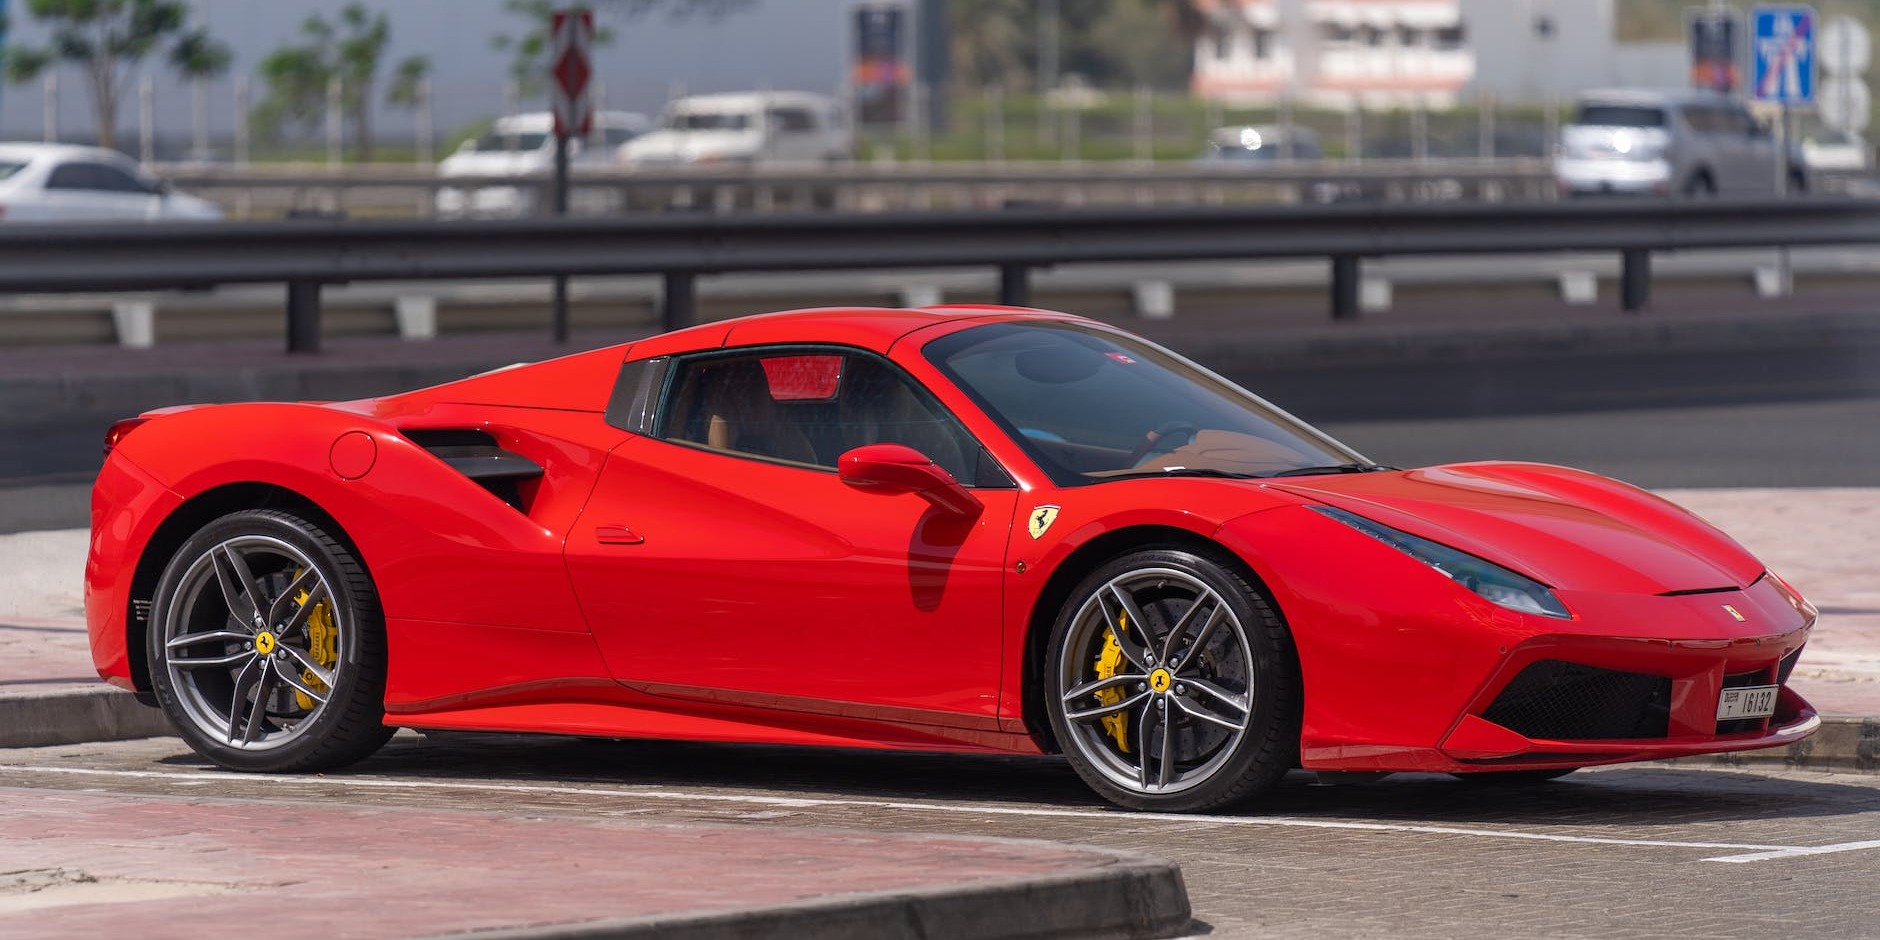 How to Choose the Best Ferrari for Your London Adventure